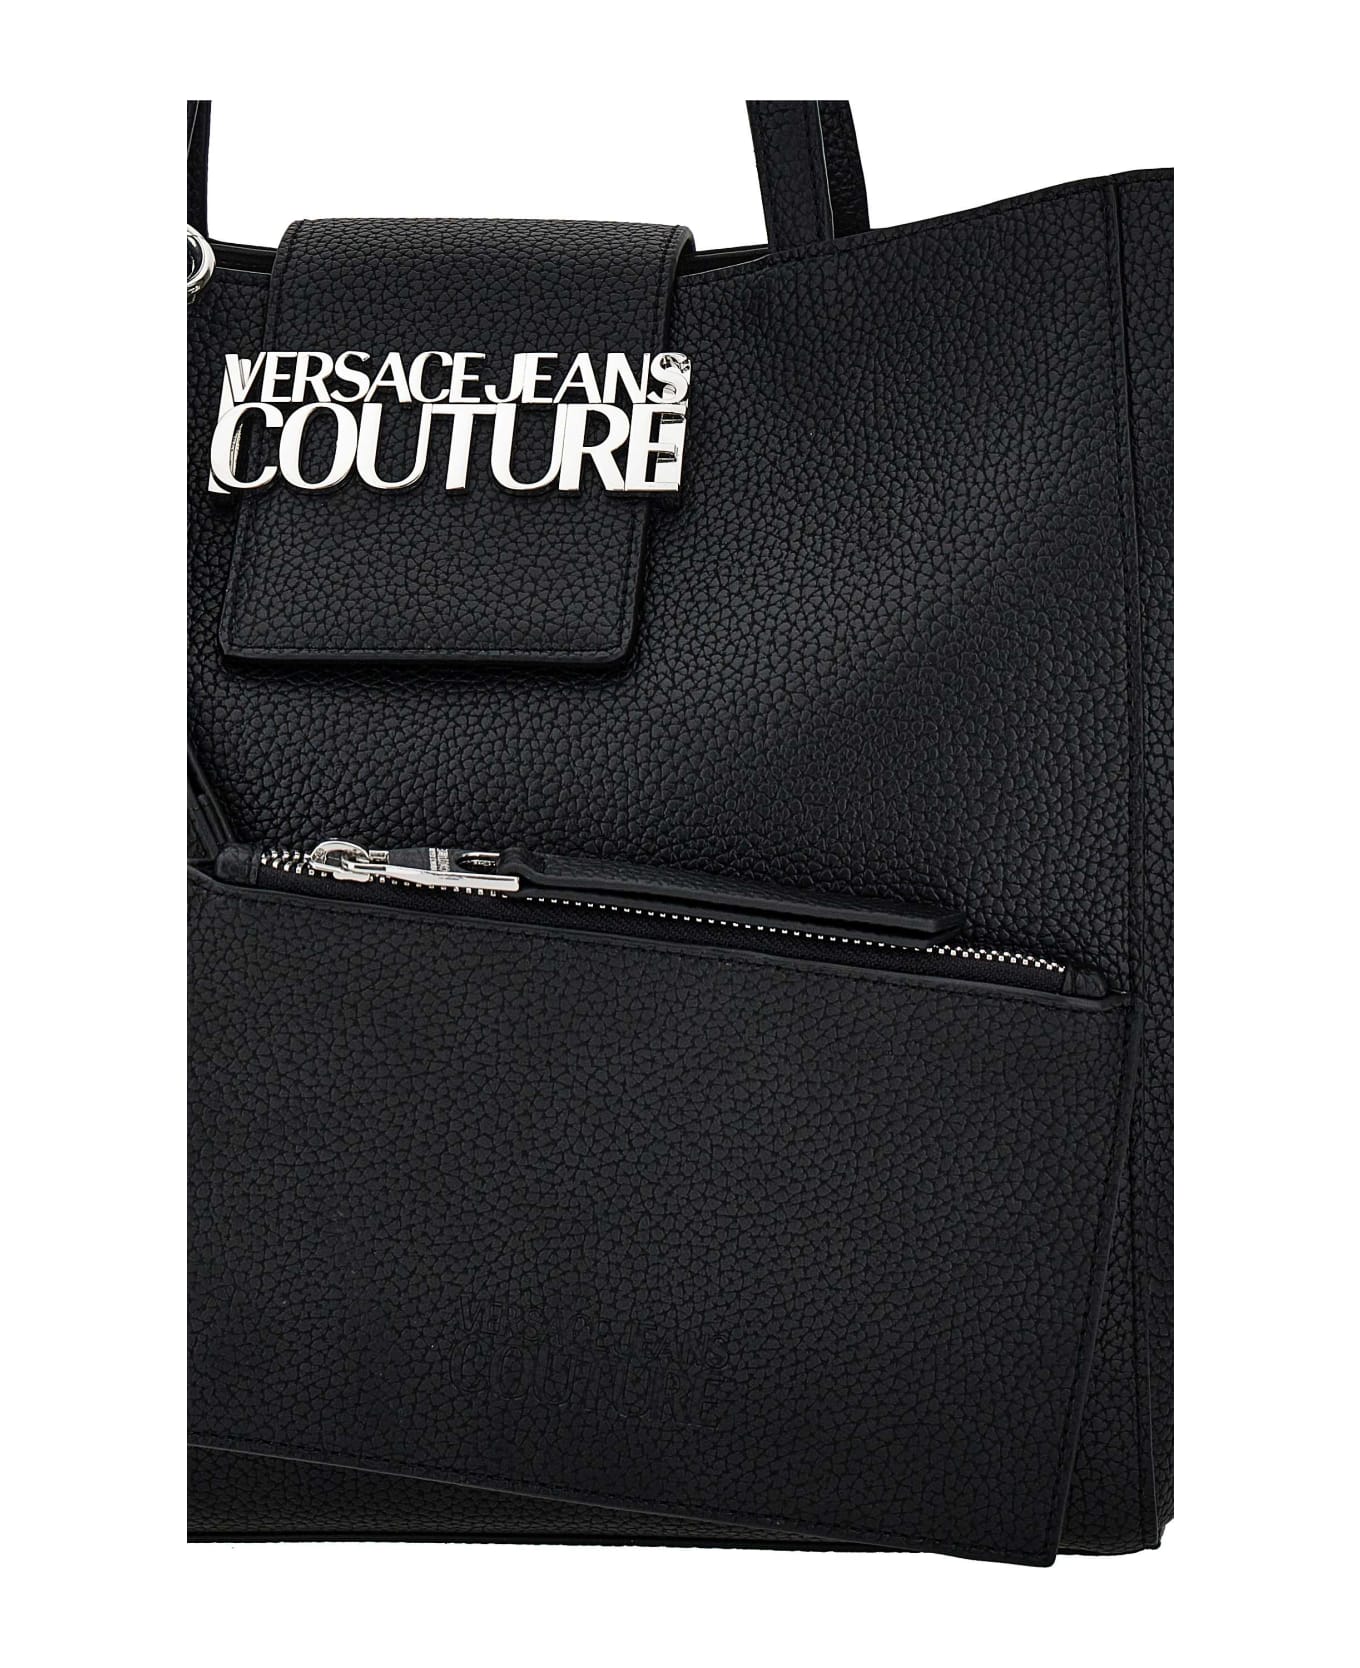 Versace Jeans Couture Shopper Bag - NERO トートバッグ